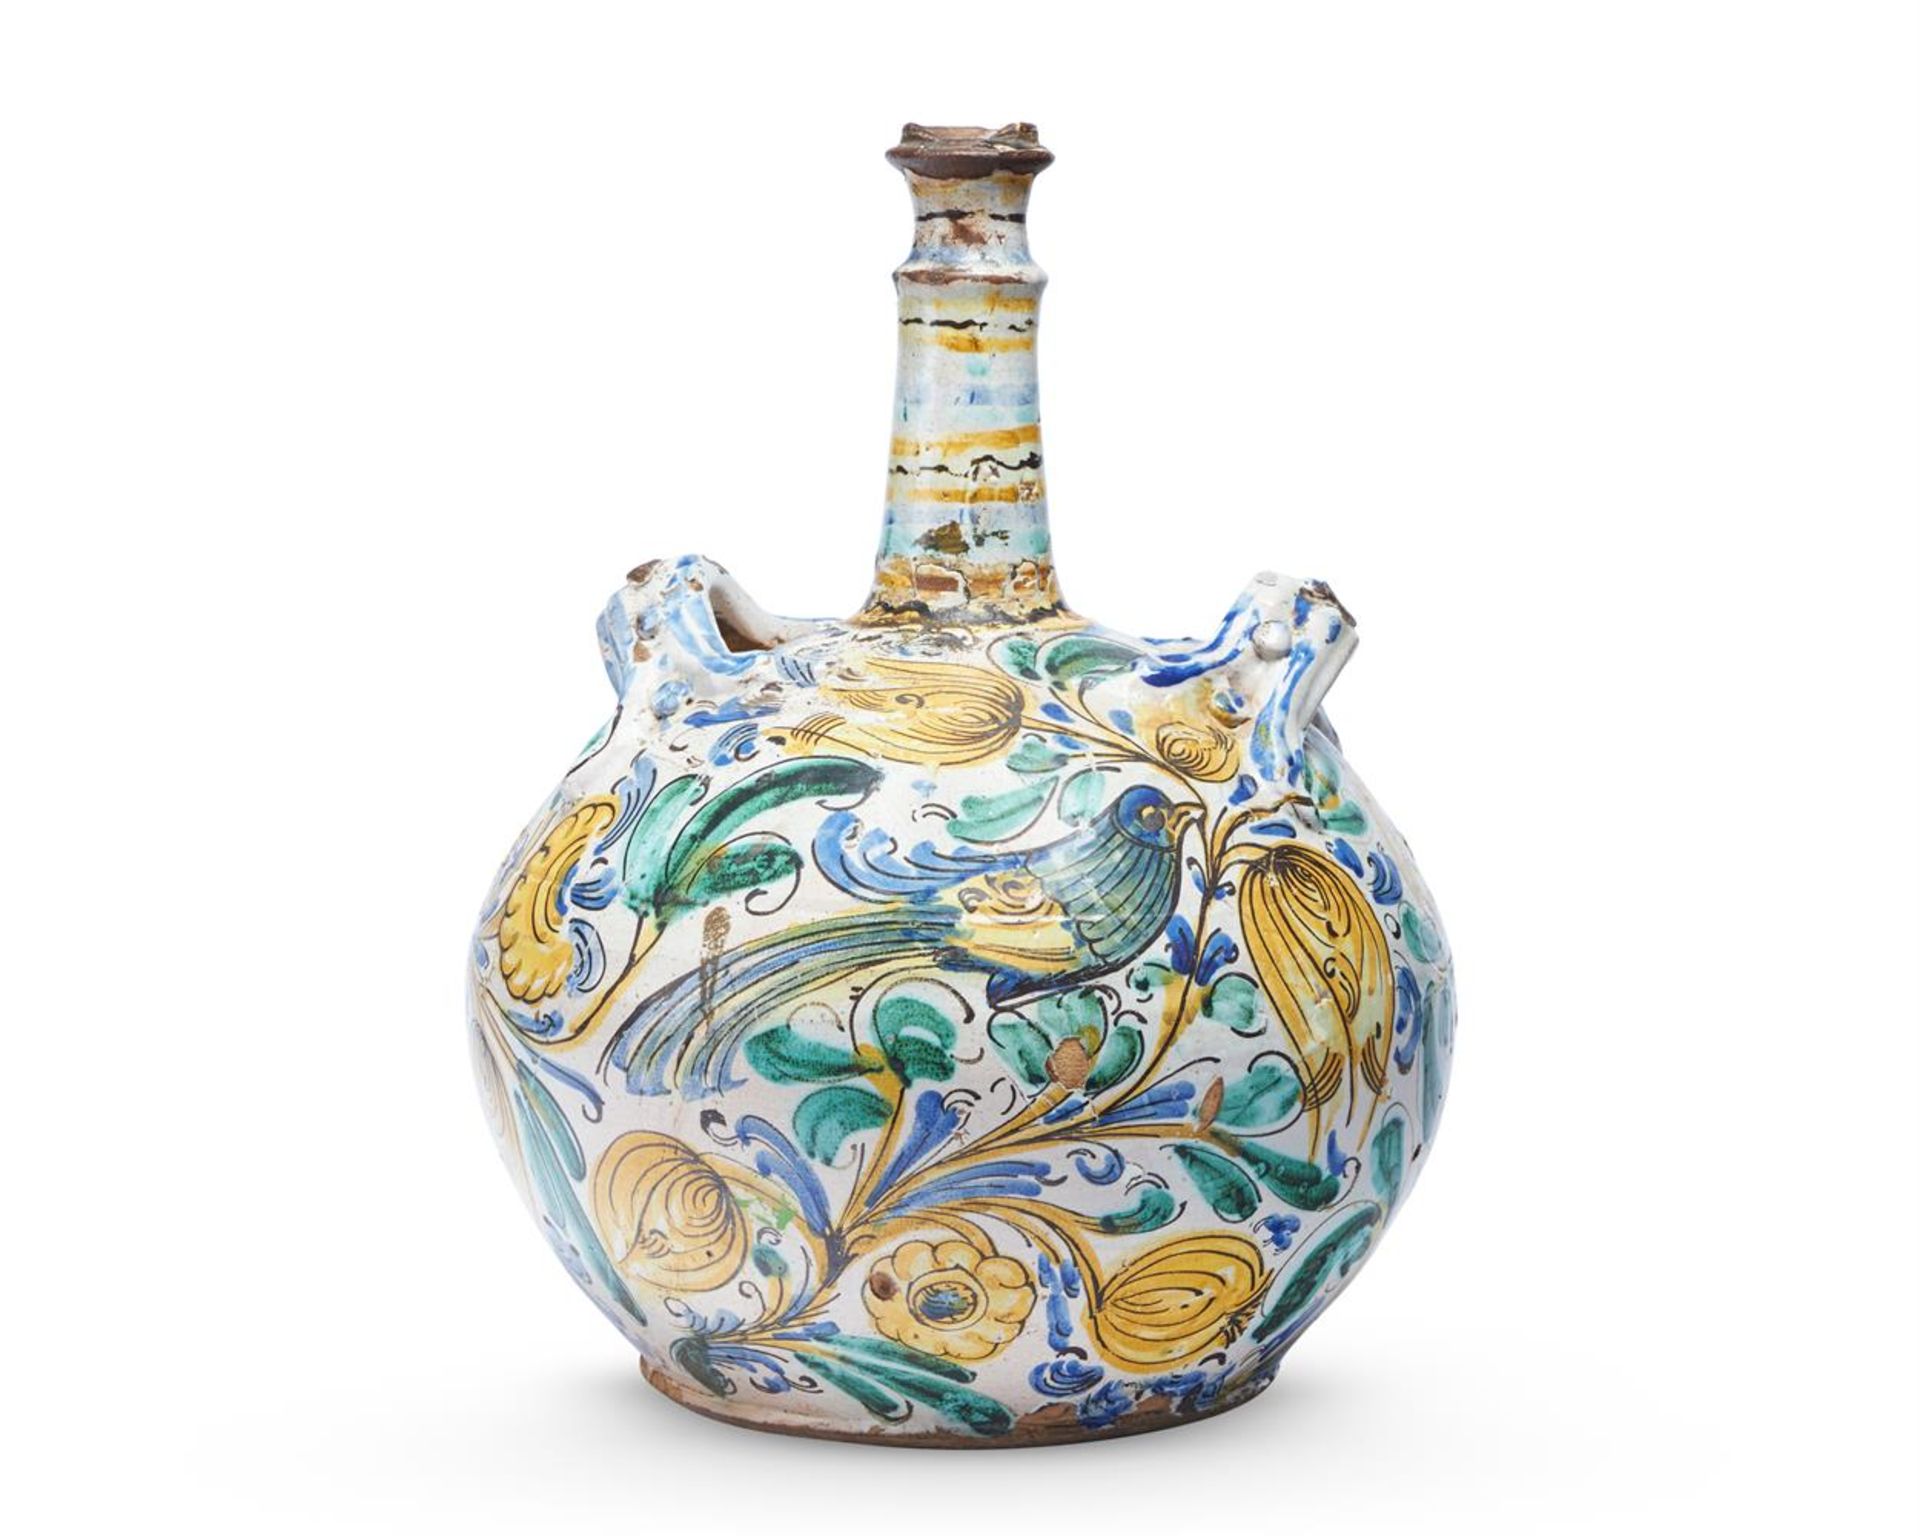 A LARGE SICILIAN MAIOLICA TWO-HANDLED FLASK OF PILGRIM BOTTLE FORM, 18TH CENTURY - Image 2 of 2